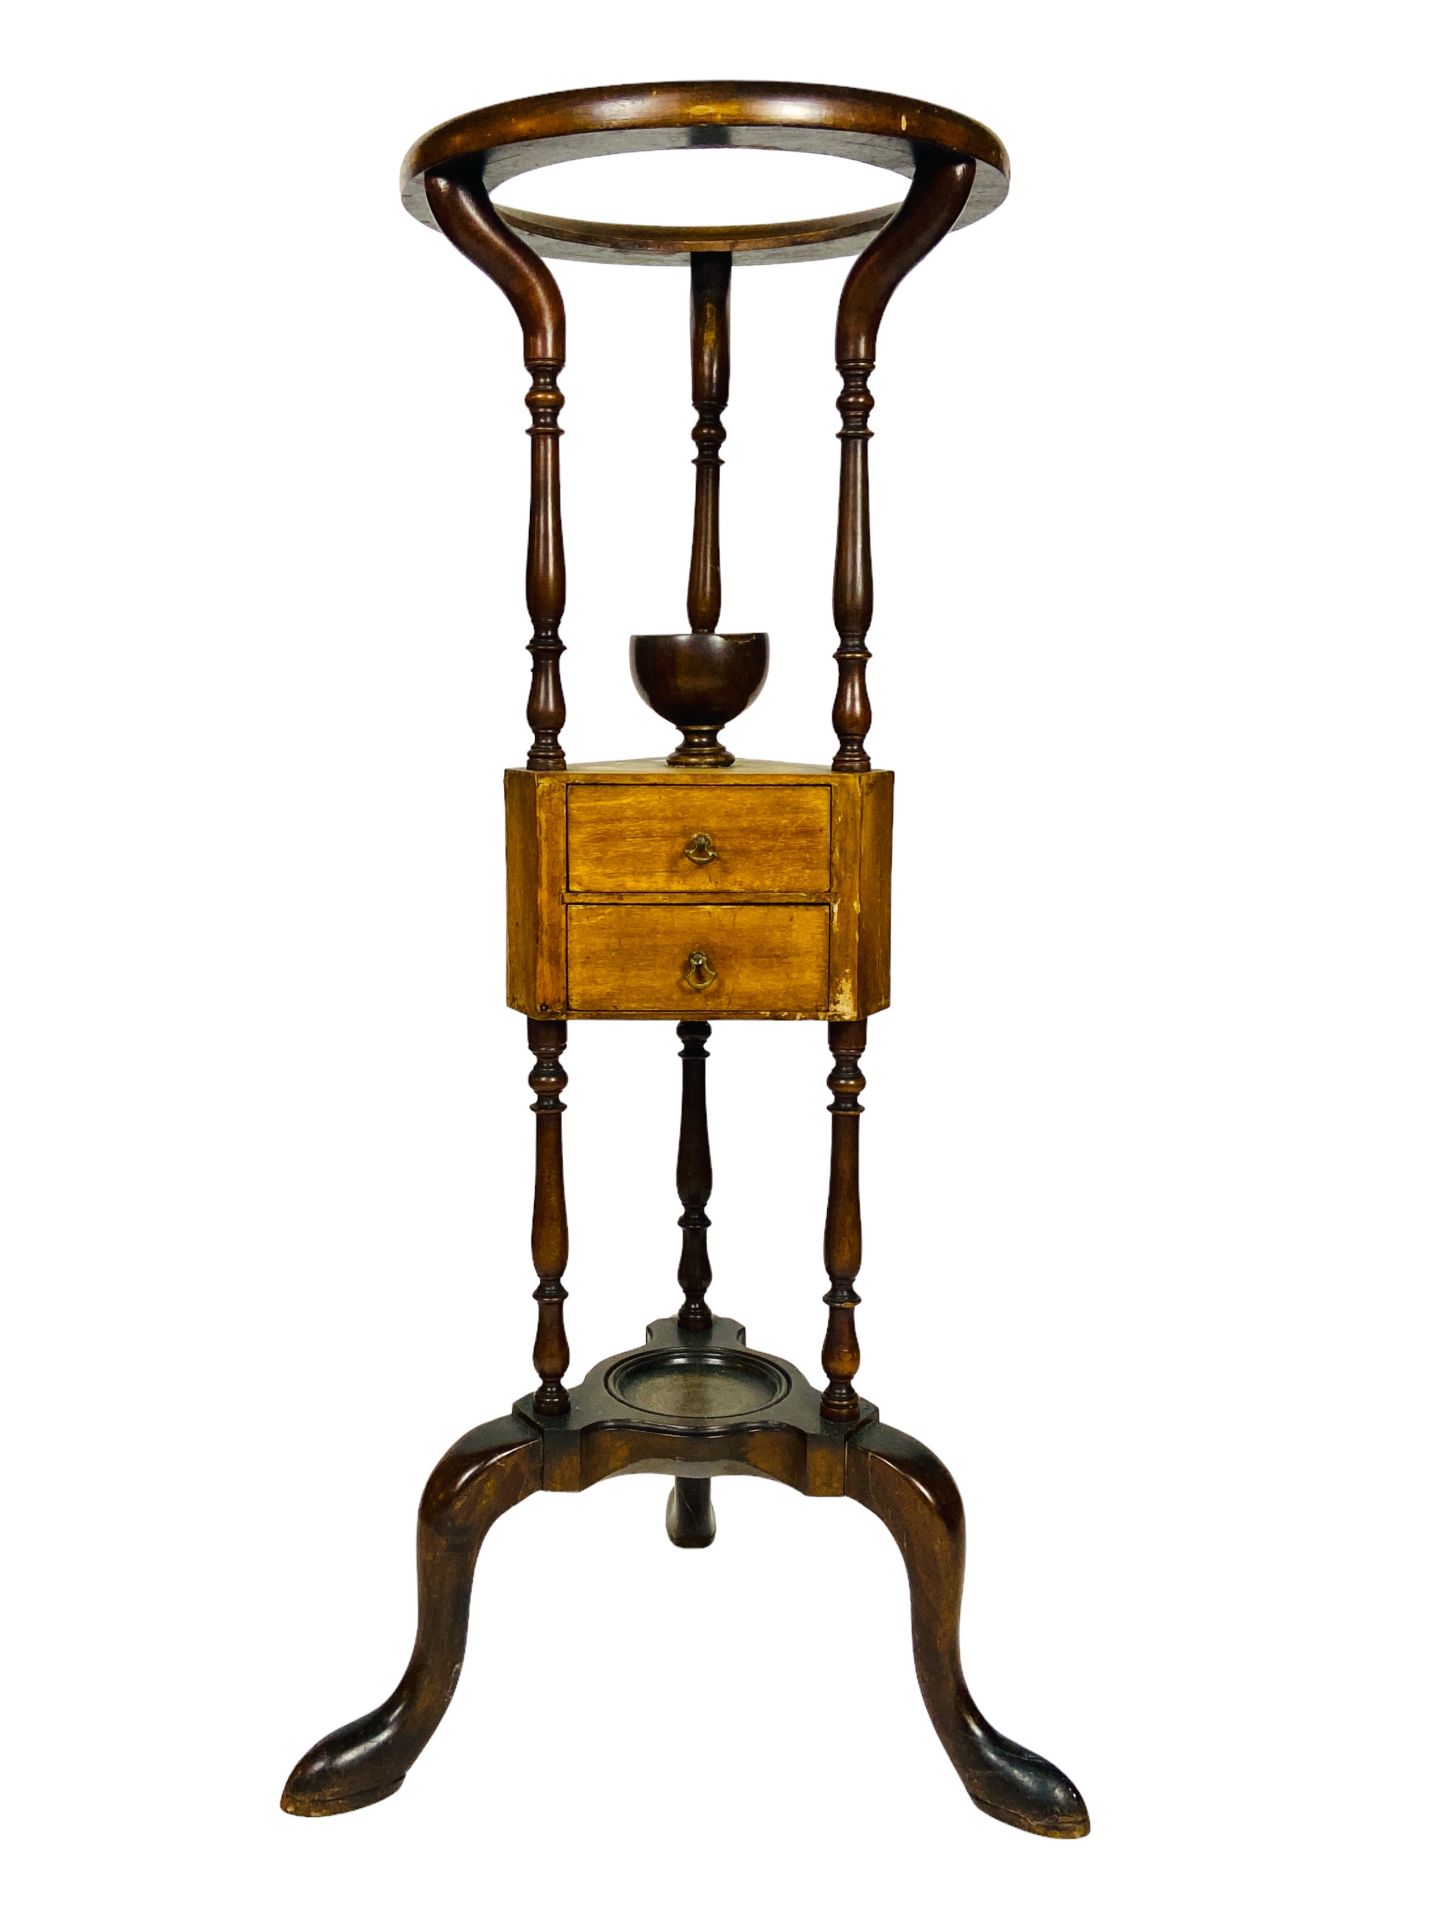 A George III style mahogany shaving stand